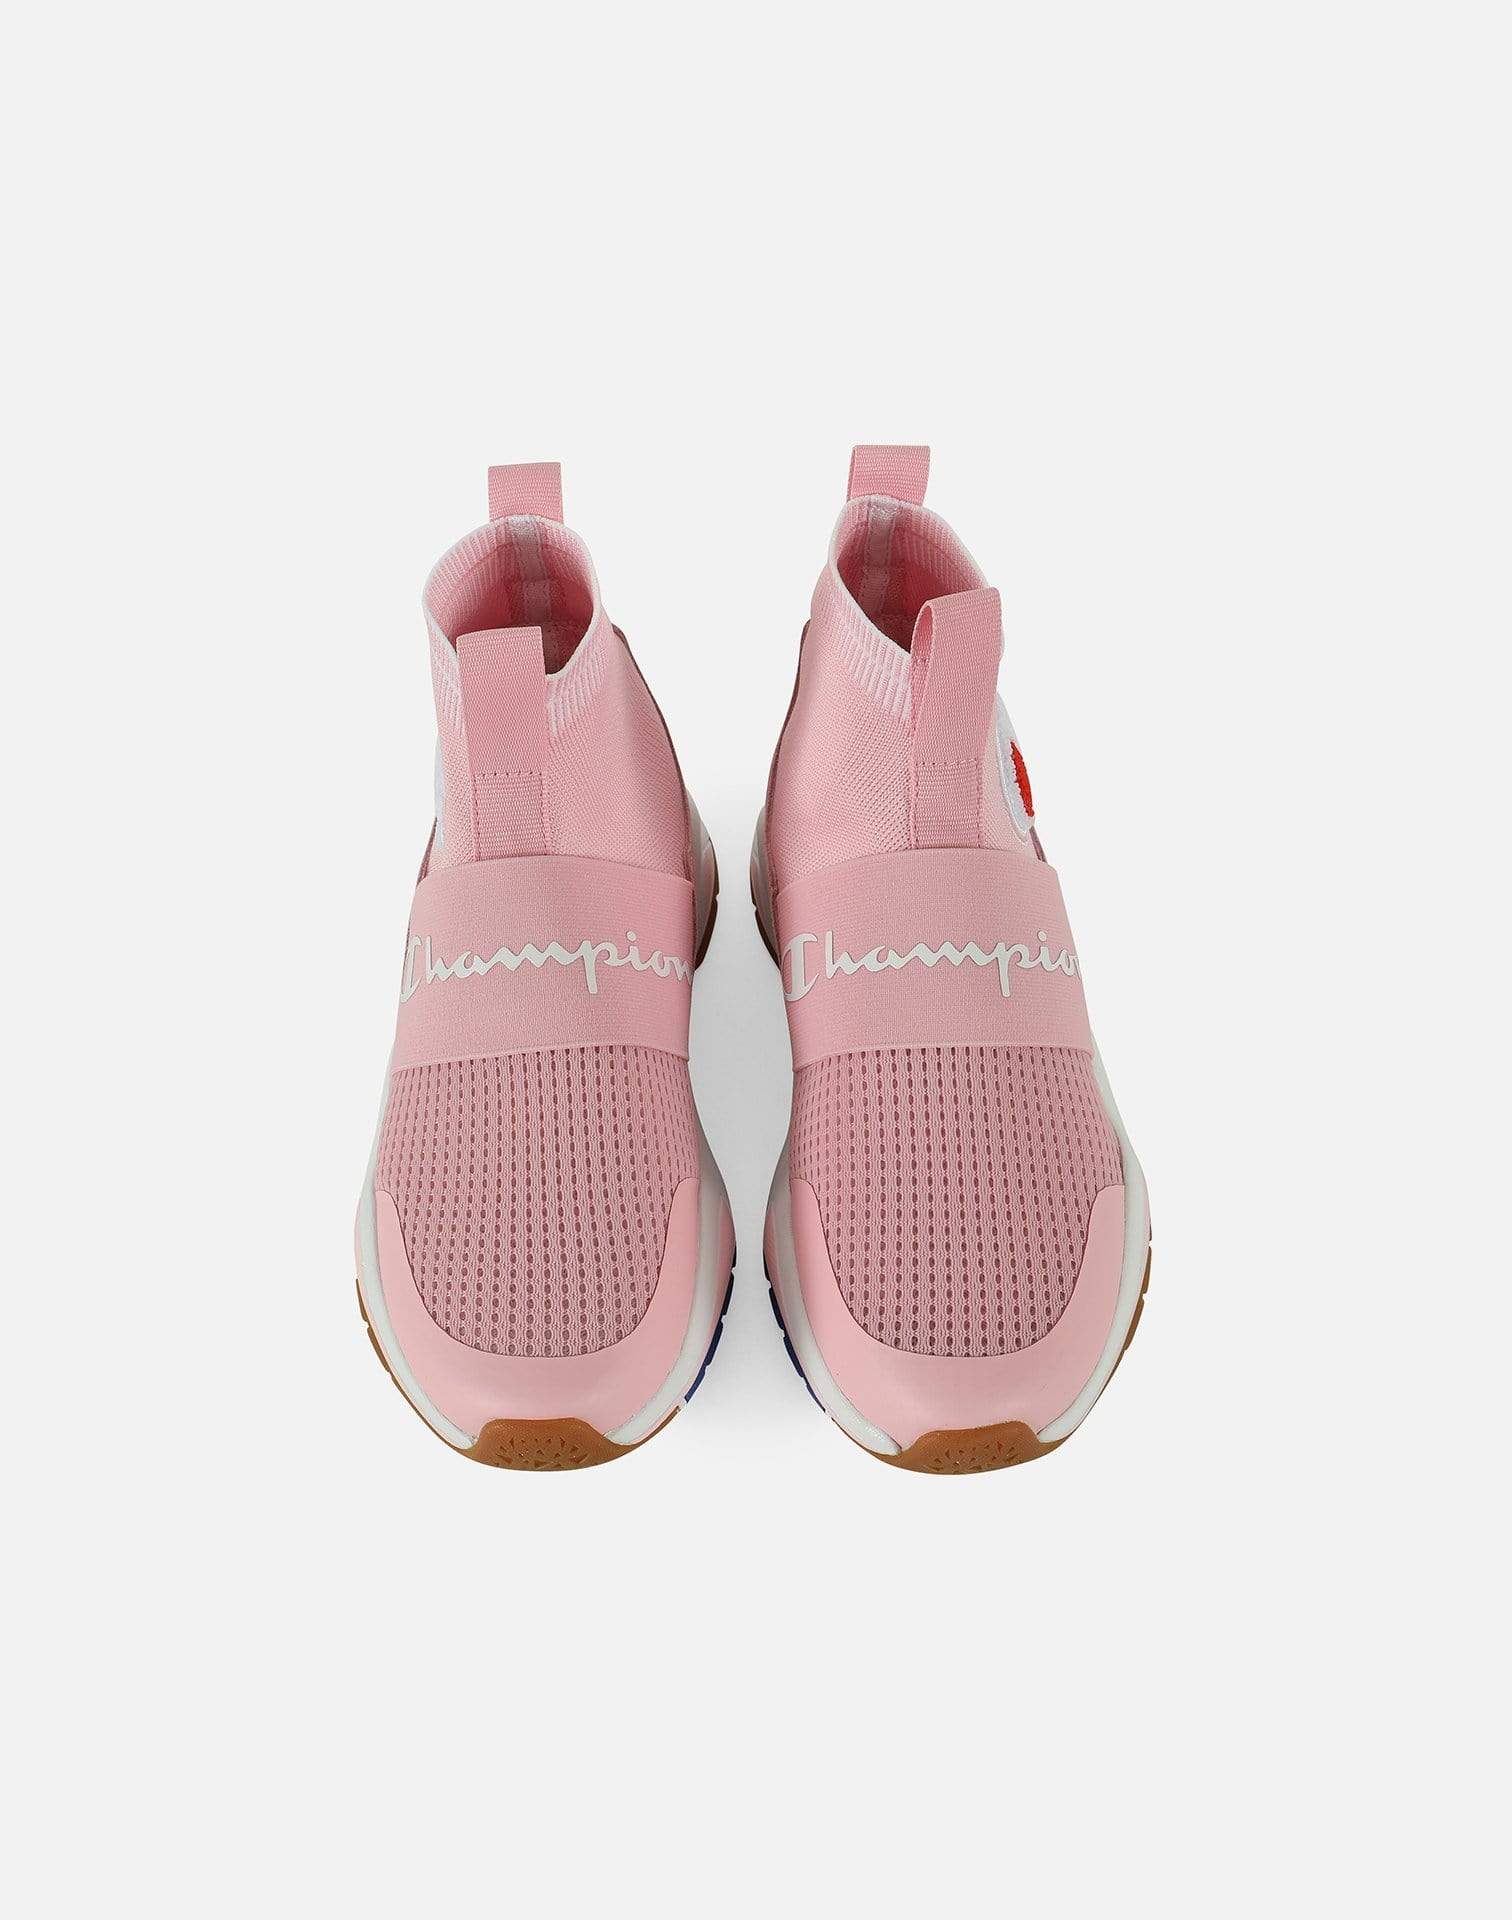 pink champion shoes